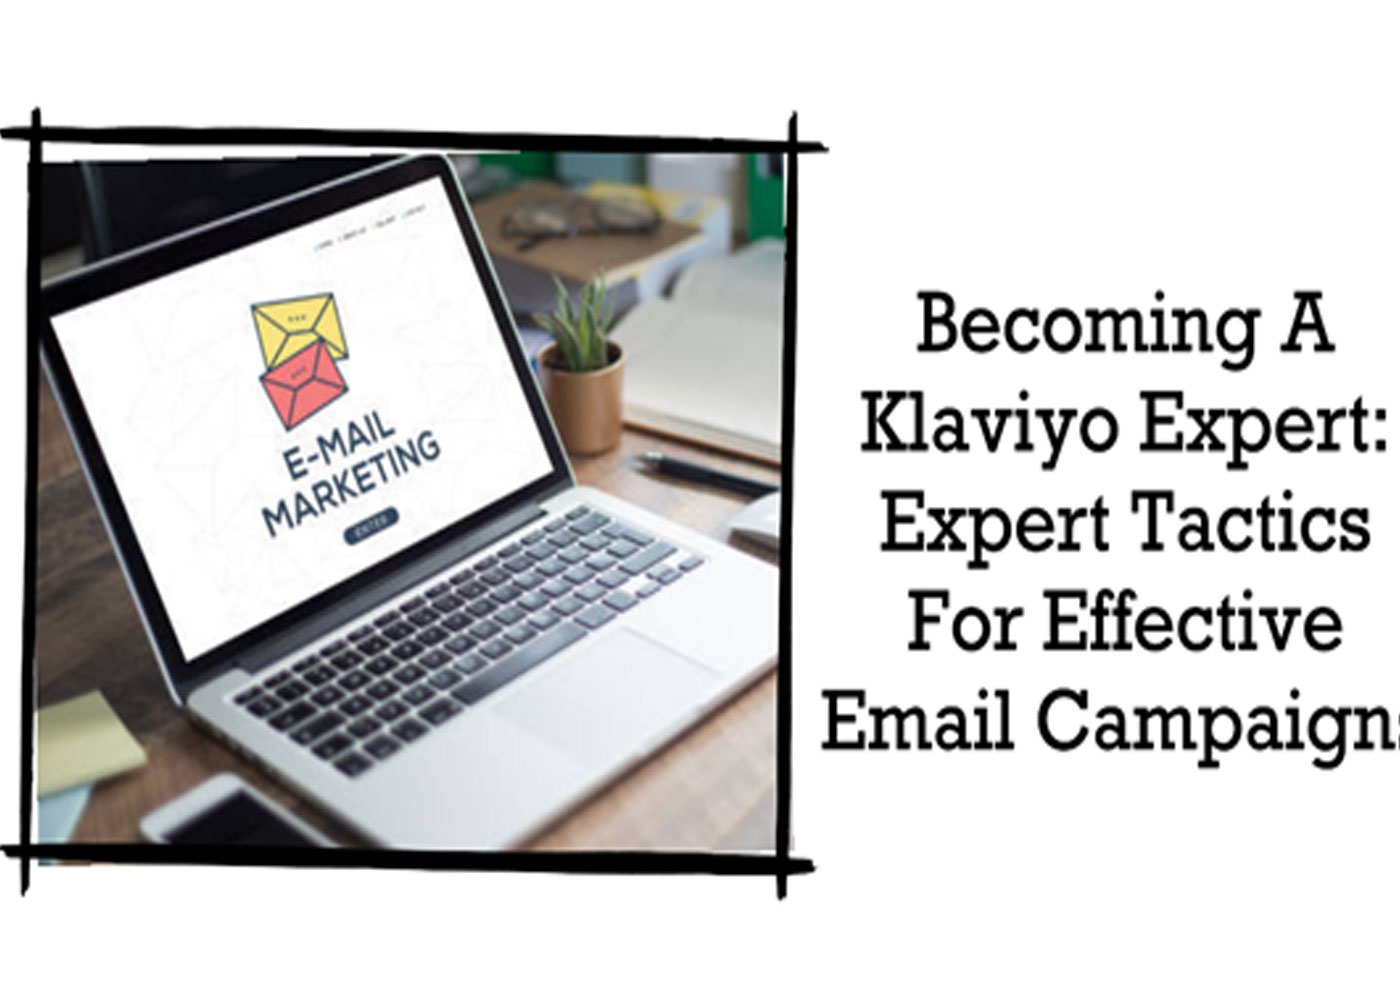 Becoming A Klaviyo Expert: Expert Tactics For Effective Email Campaigns